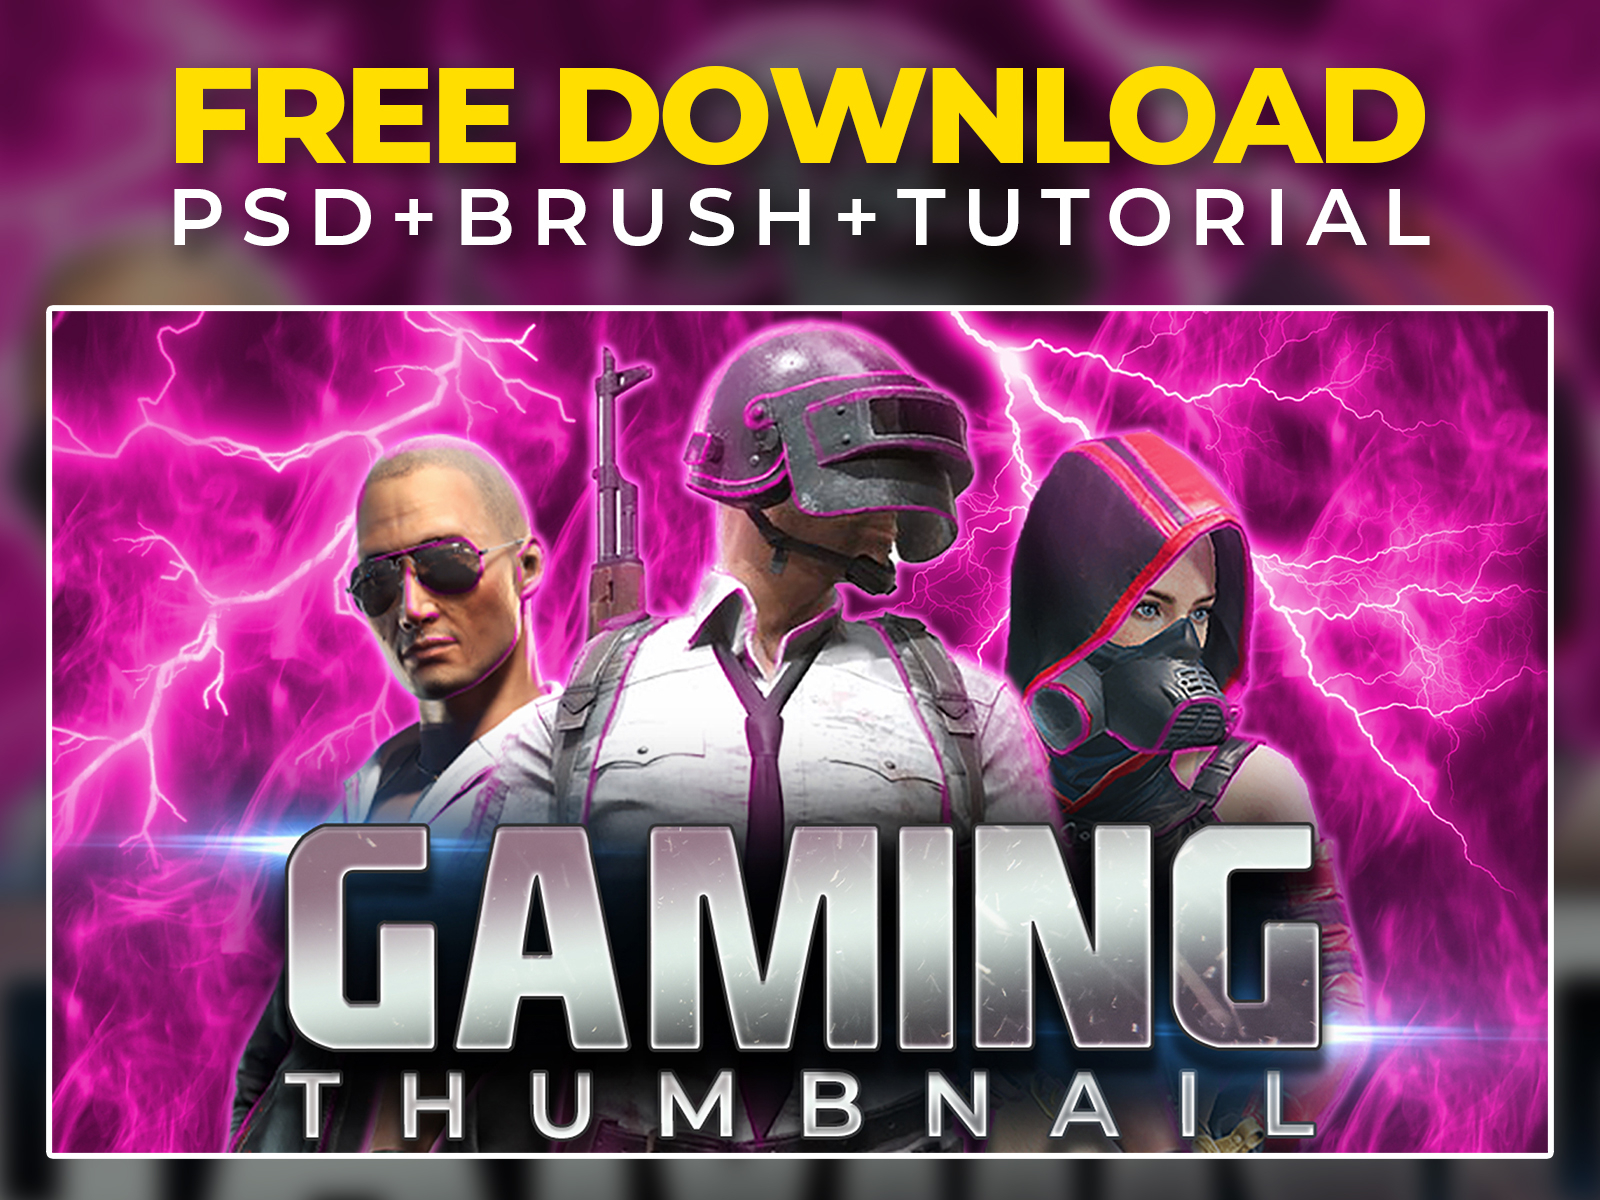 Gaming Youtube Thumbnail Design Template Free Download Psd File By Rifat Tanvir On Dribbble